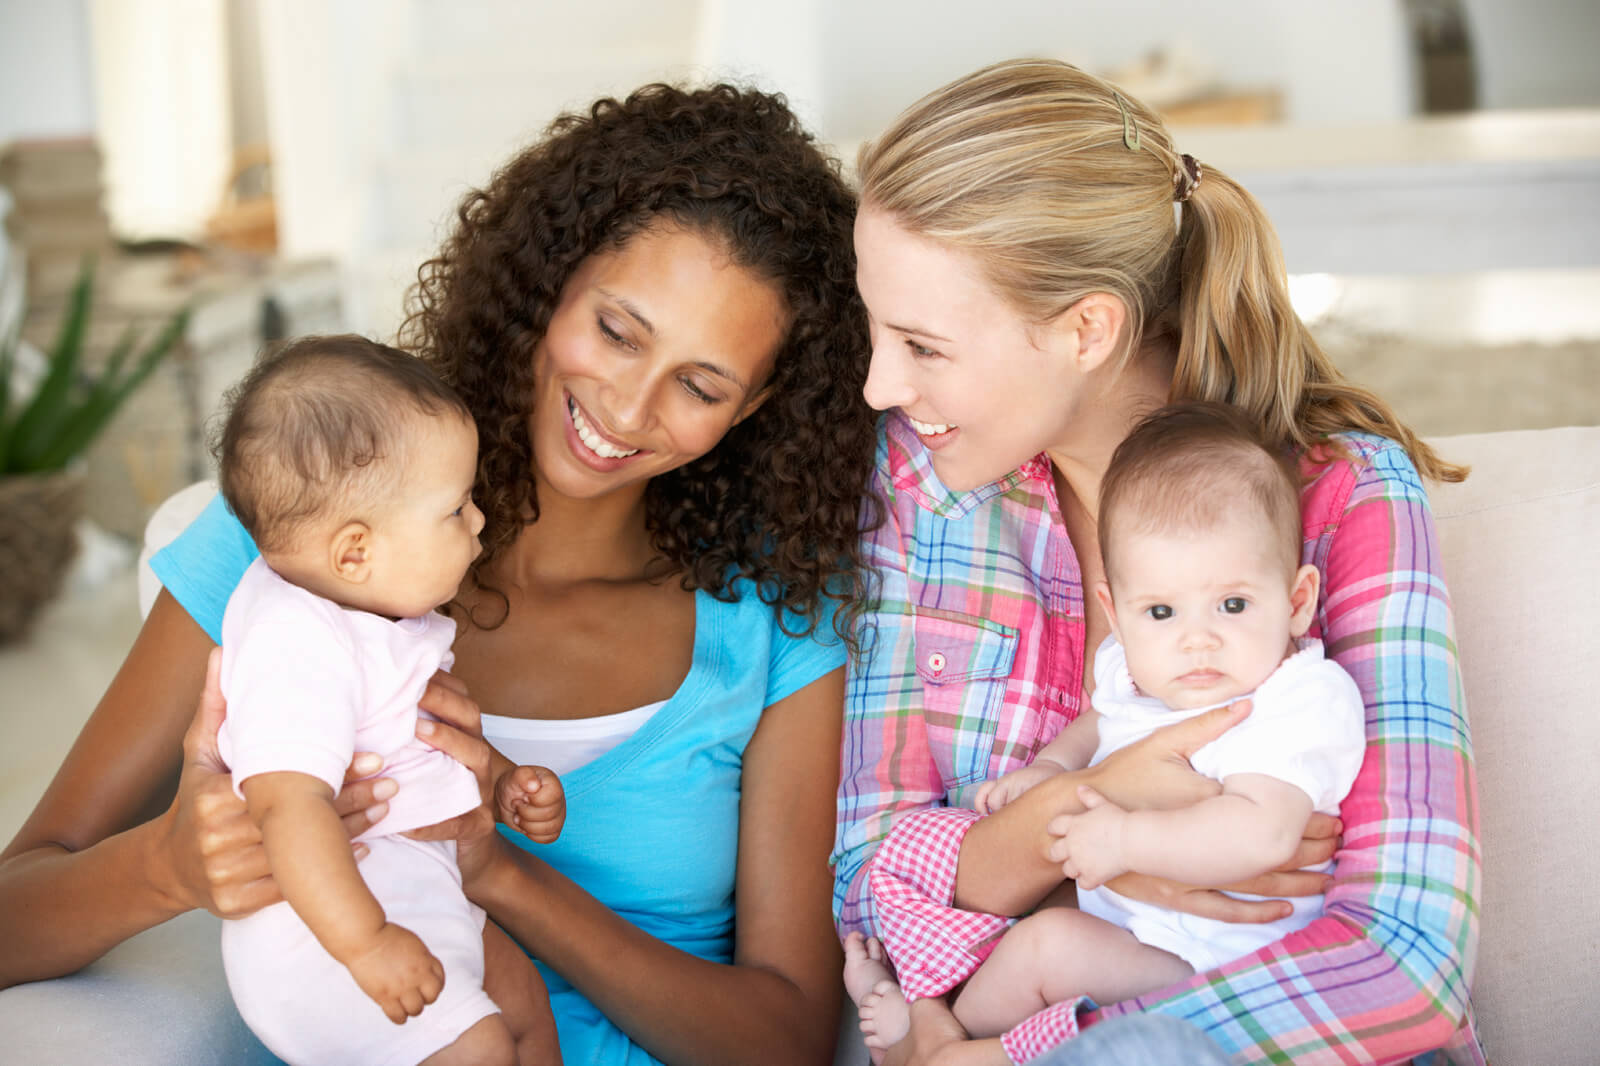 Finding breastfeeding support and information